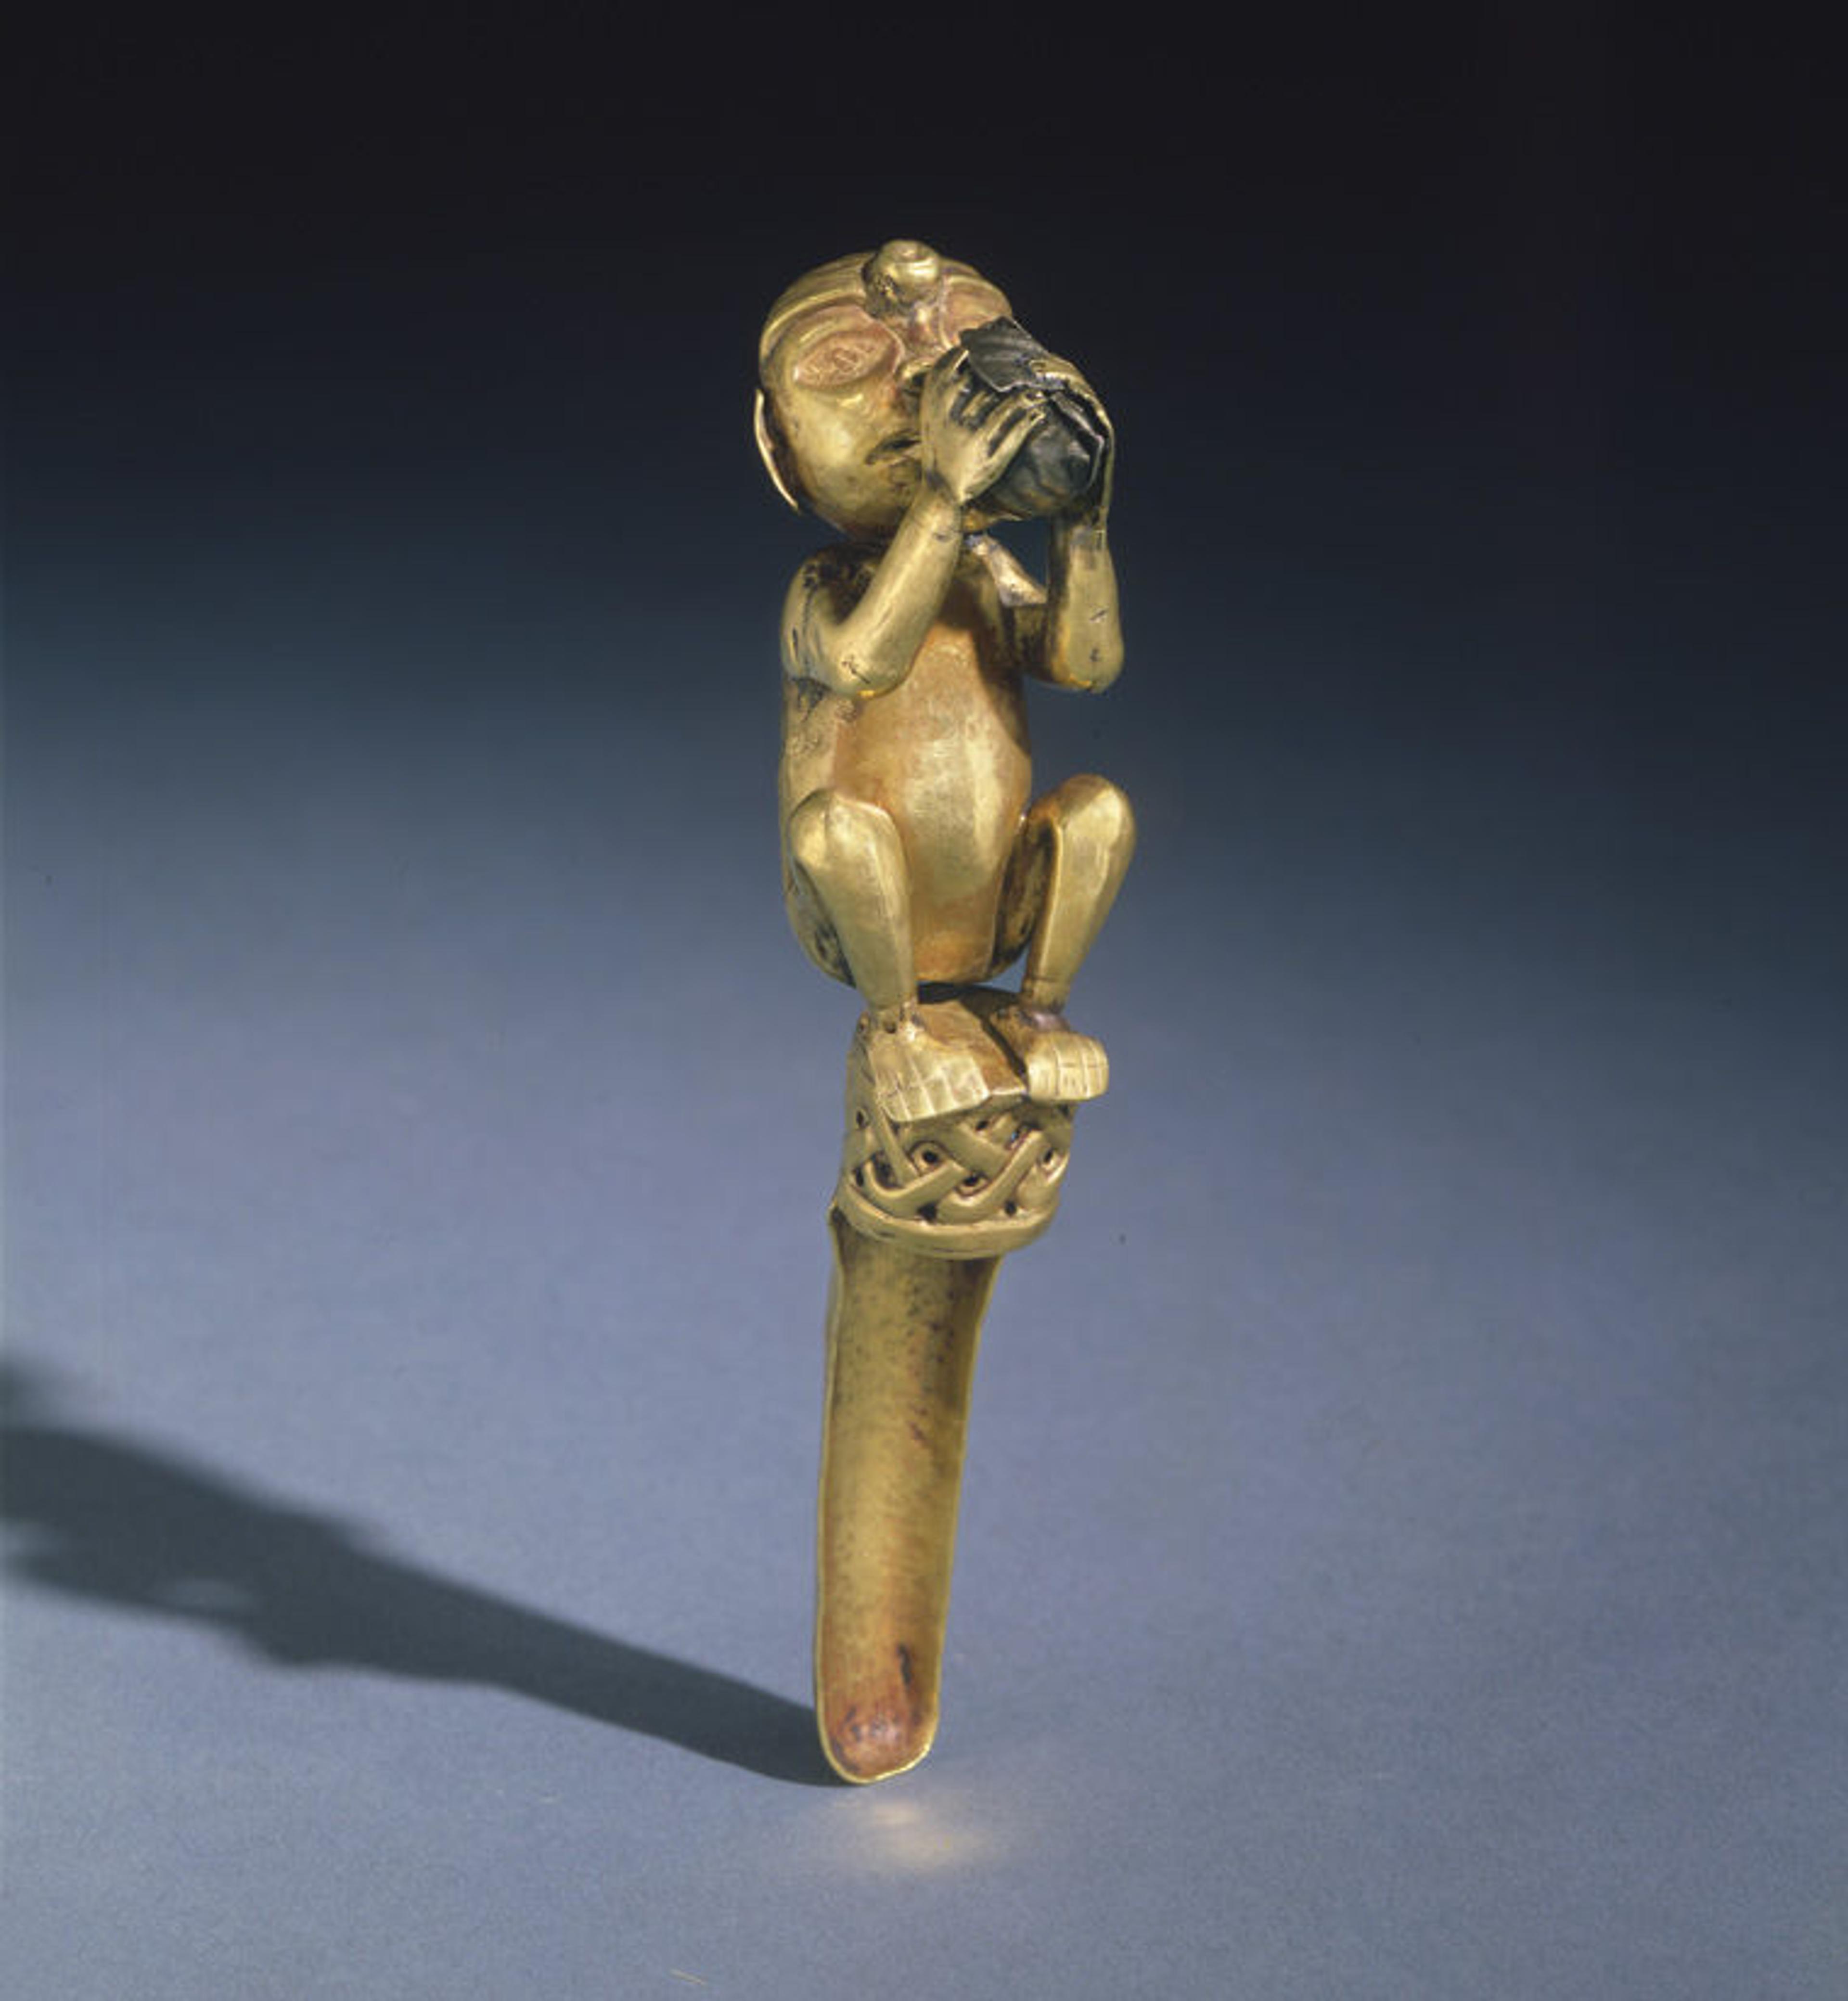 An ancient Peruvian effigy spoon made of gold and featuring a figure playing a conch trumpet